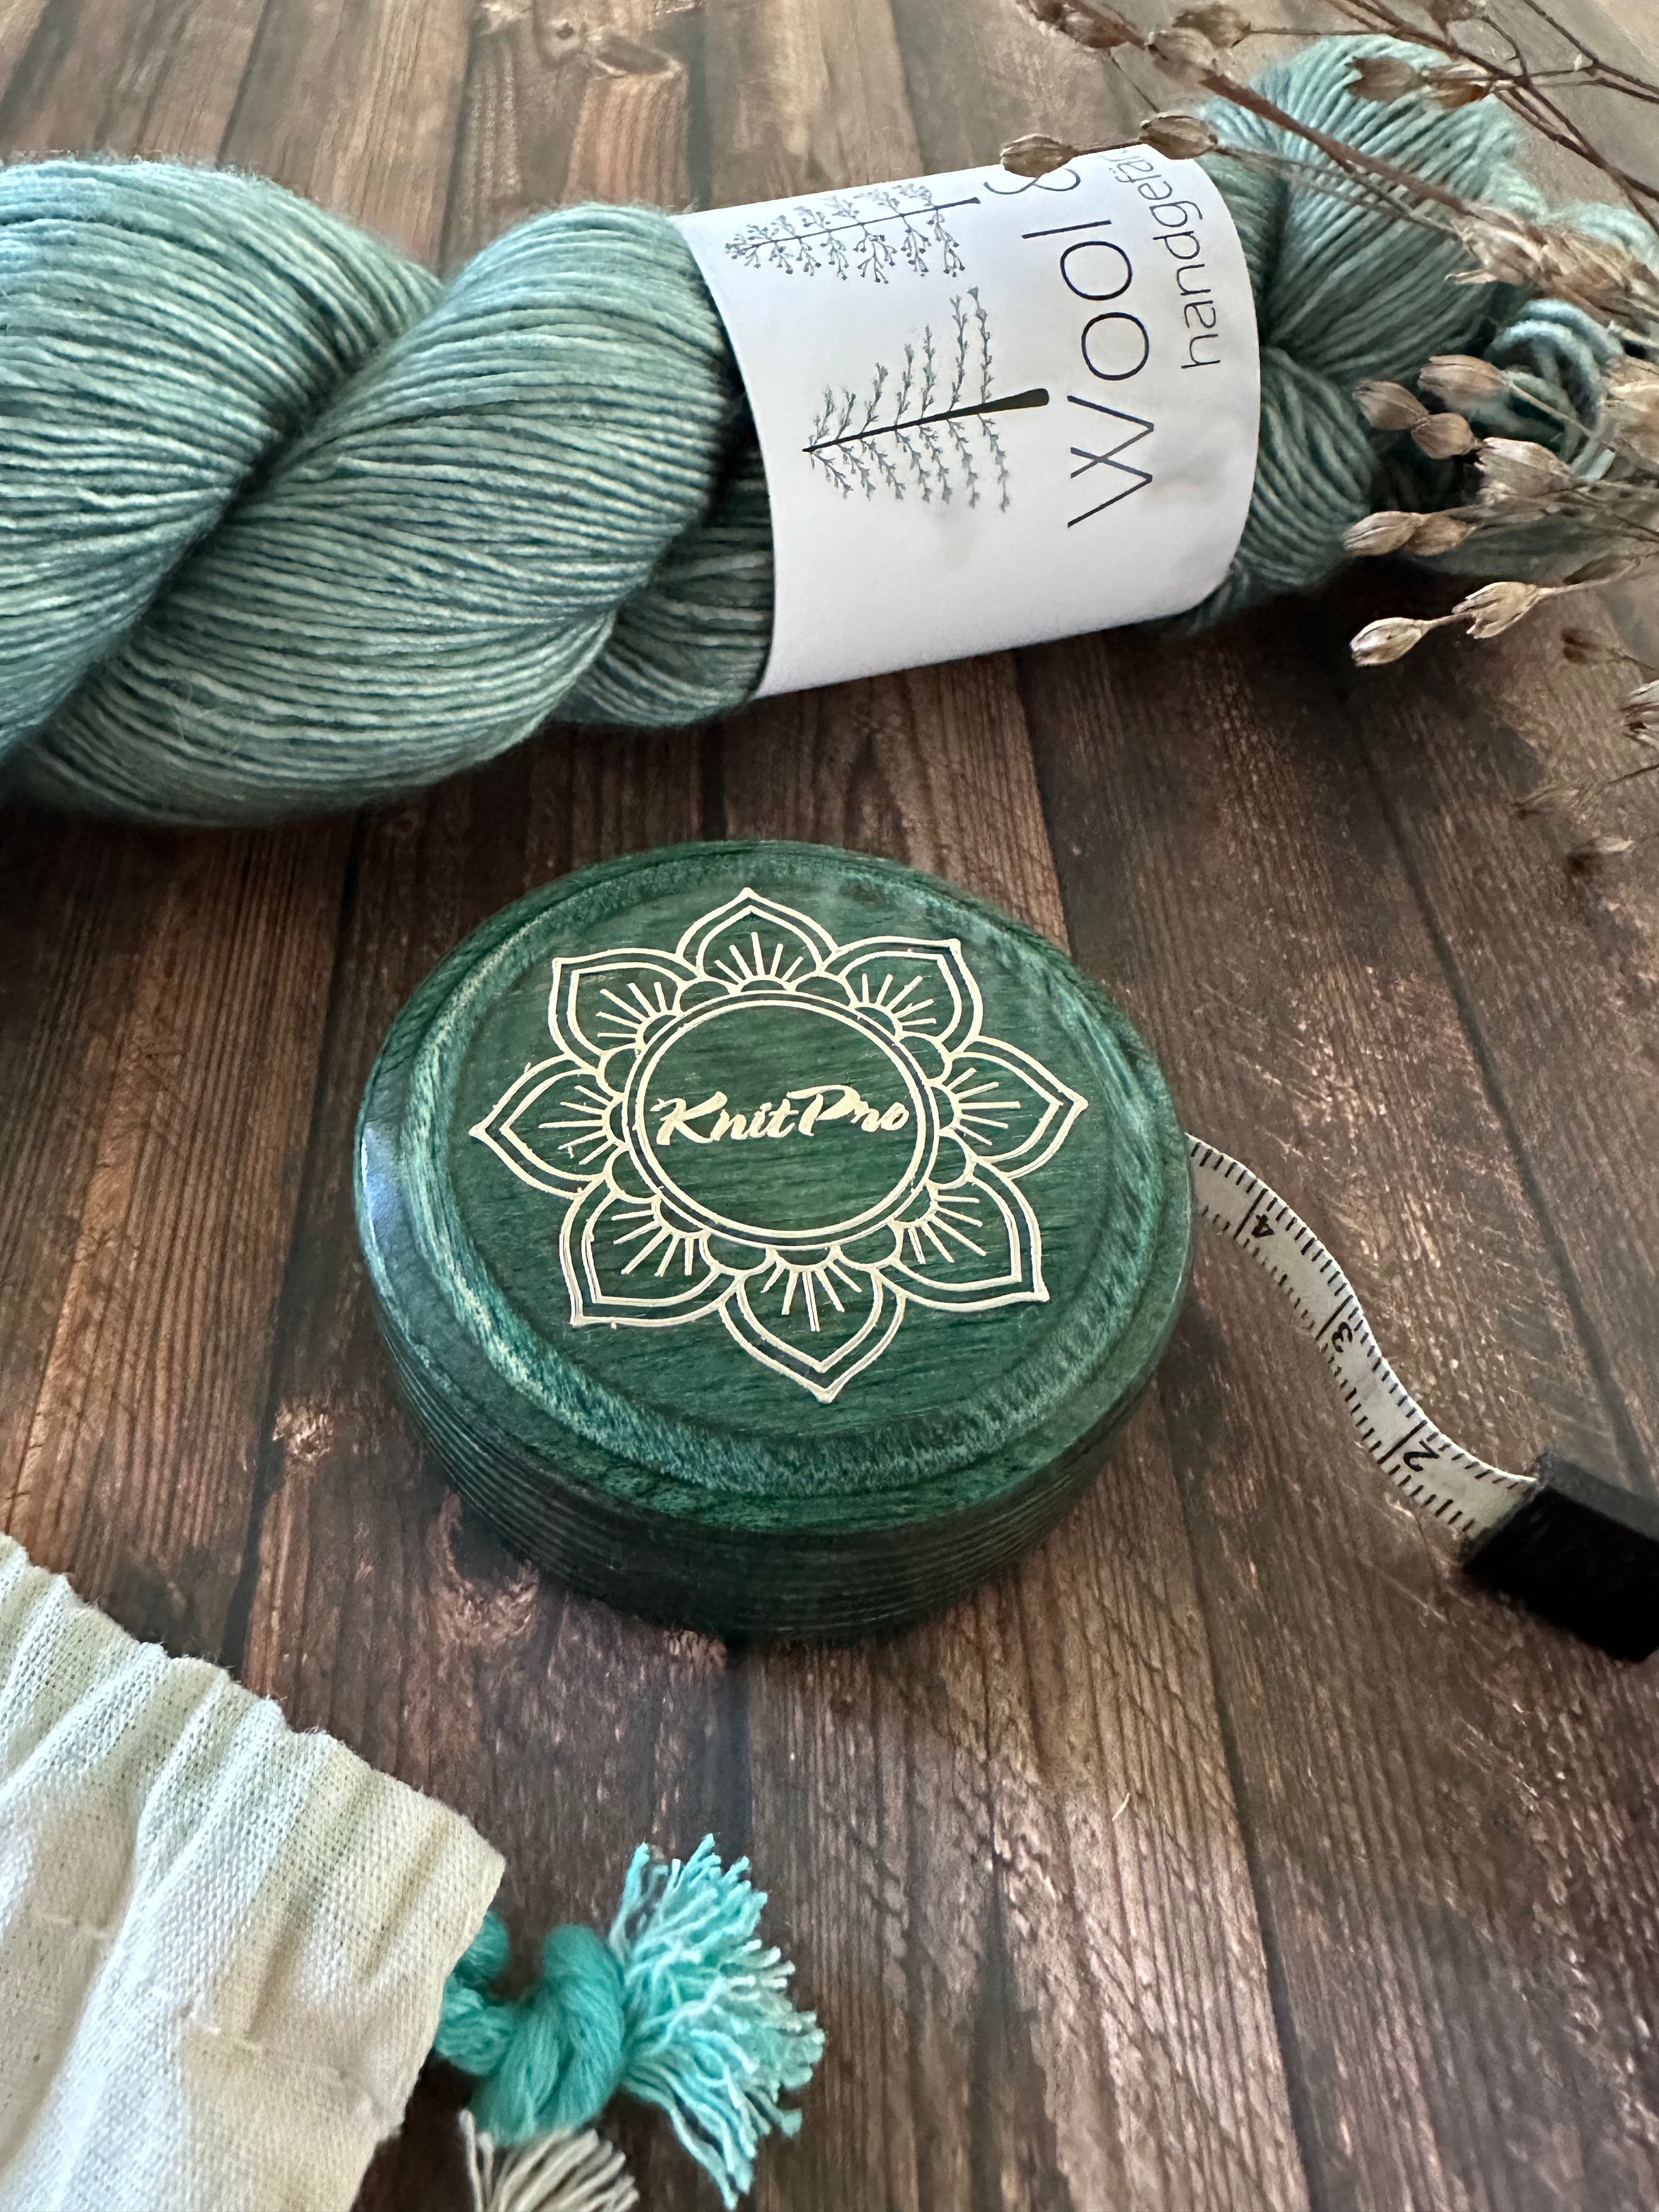 Maßband  -  Knit Pro  The Mindful Collection -